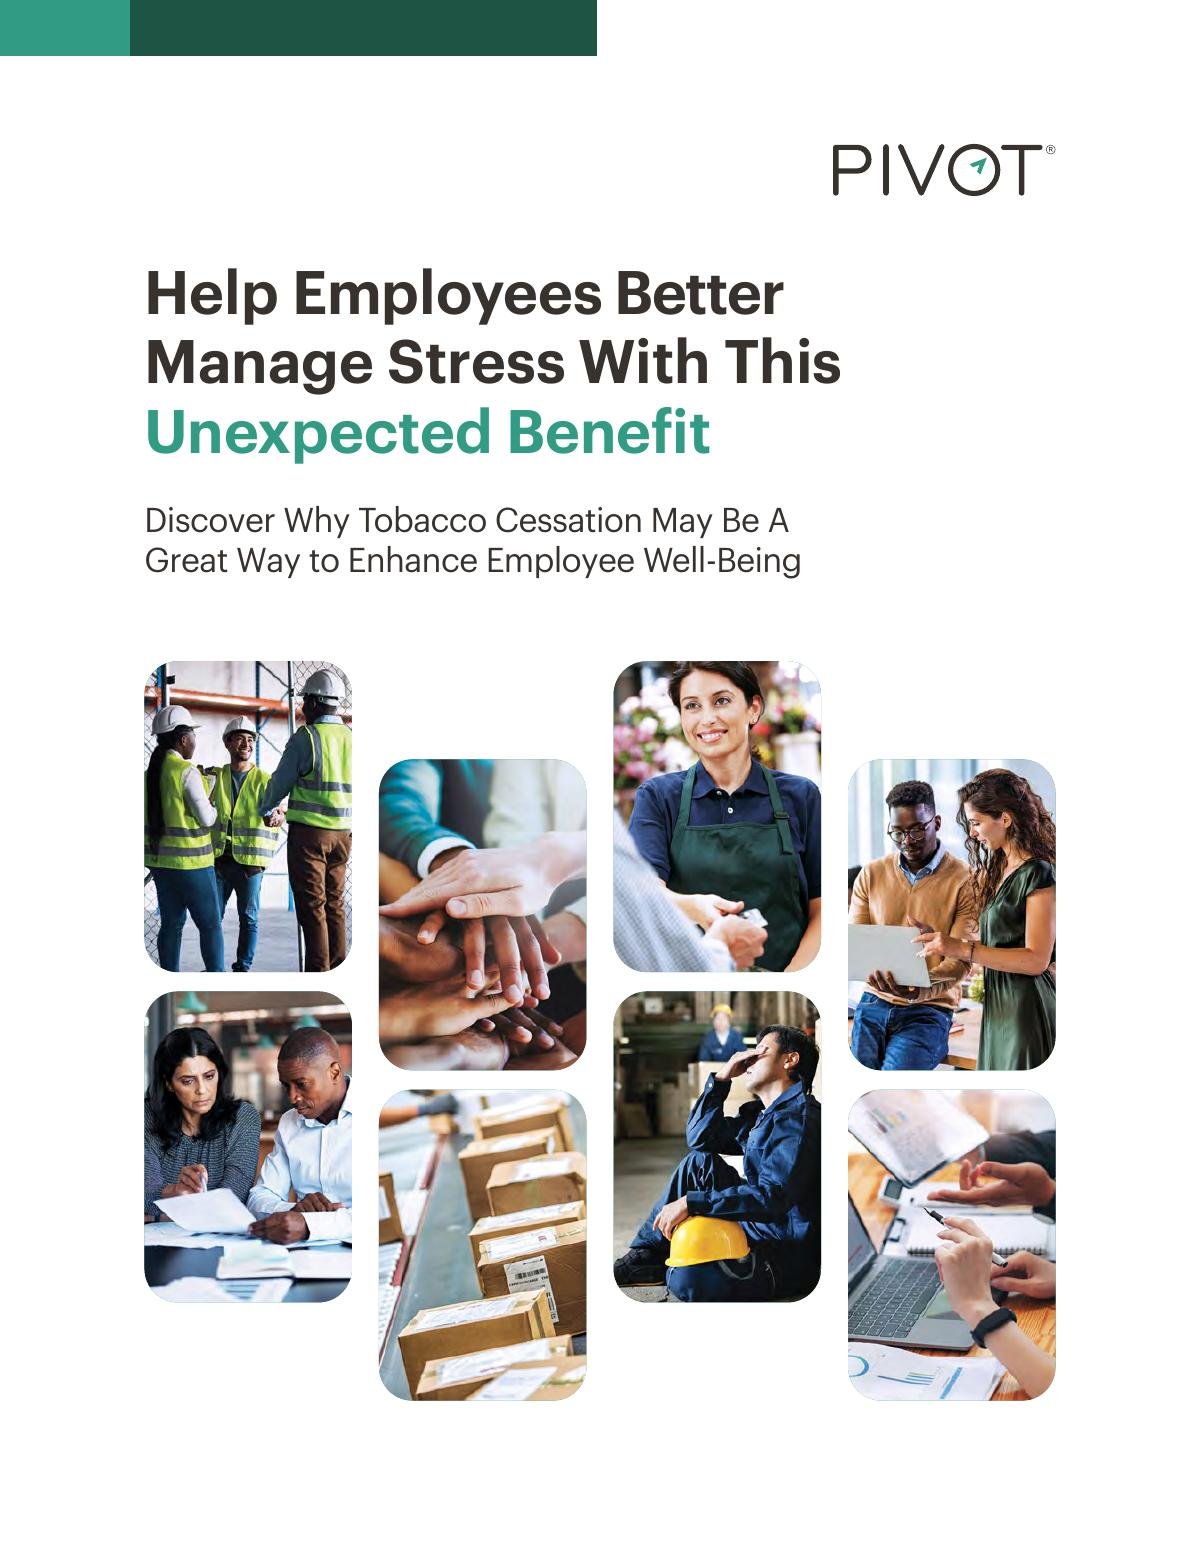 Help Employees Better Manage Stress With This Unexpected Benefit